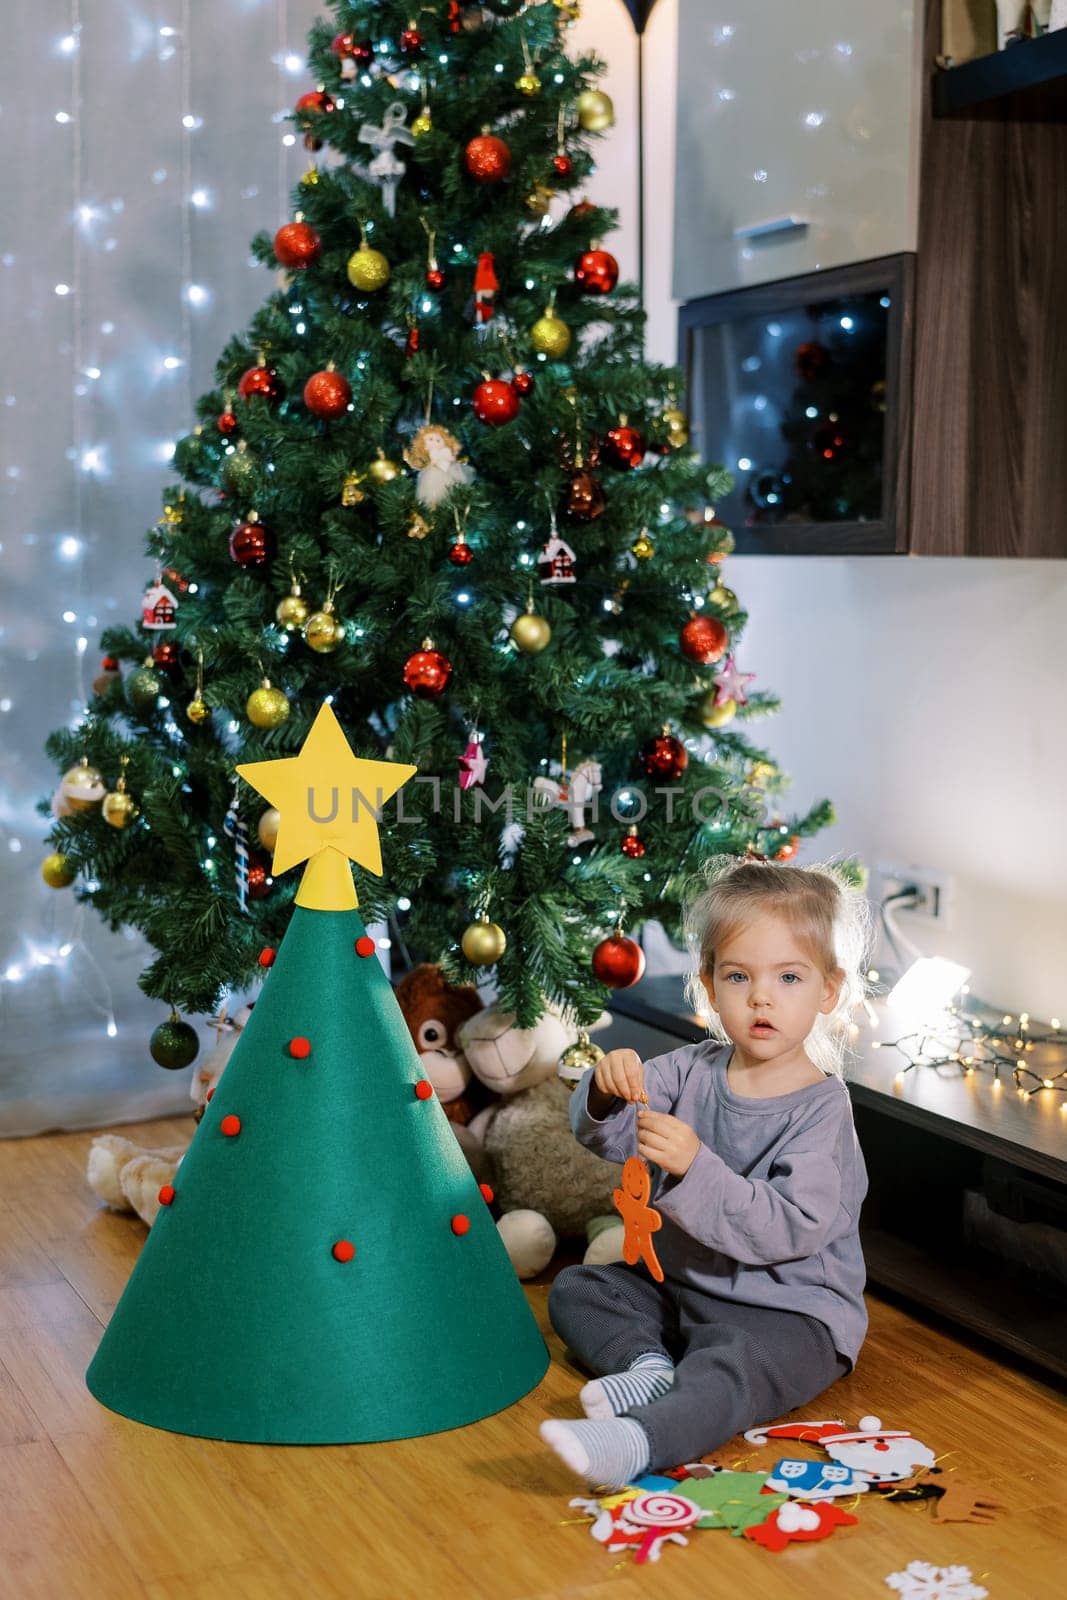 Little girl holds a felt toy in her hands while sitting on the floor near a toy Christmas tree by Nadtochiy